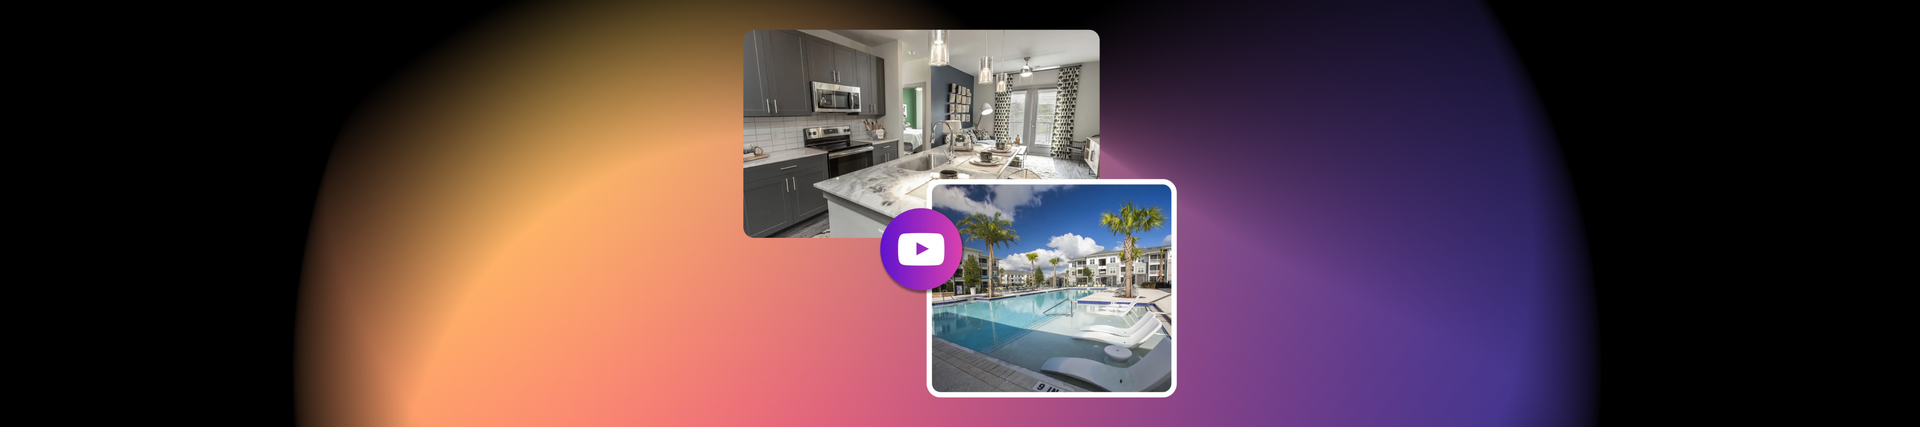 Using Video Marketing in Your Apartment Community’s Digital Marketing Toolkit